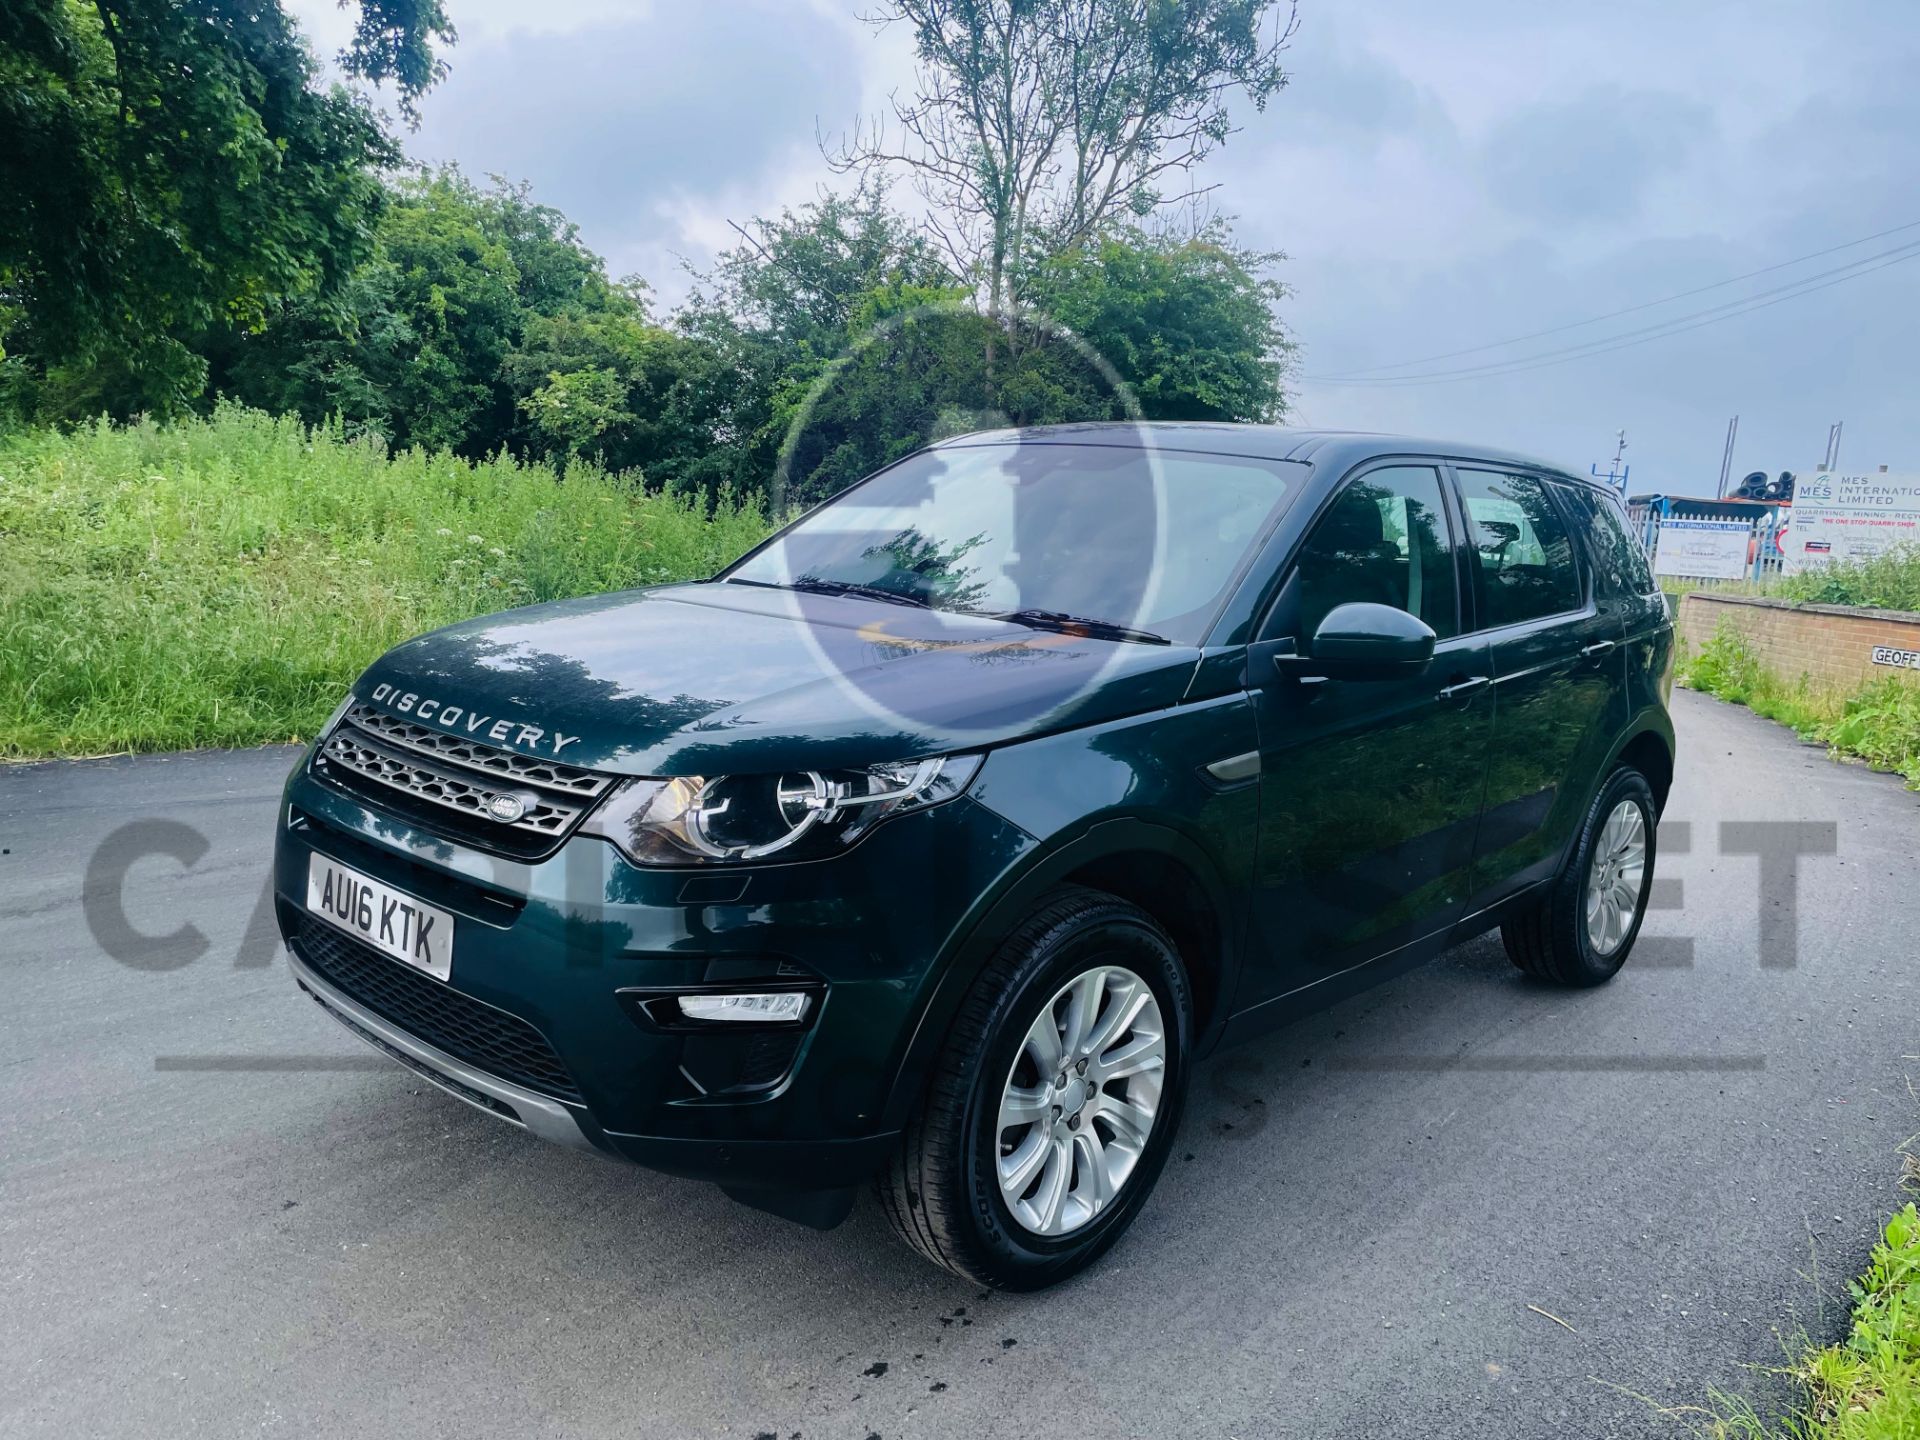 LAND ROVER DISCOVERY SPORT *SE TECH* 7 SEATER SUV (2016) 2.0 TD4 - AUTO *LEATHER & NAV* (NO VAT) - Image 5 of 54